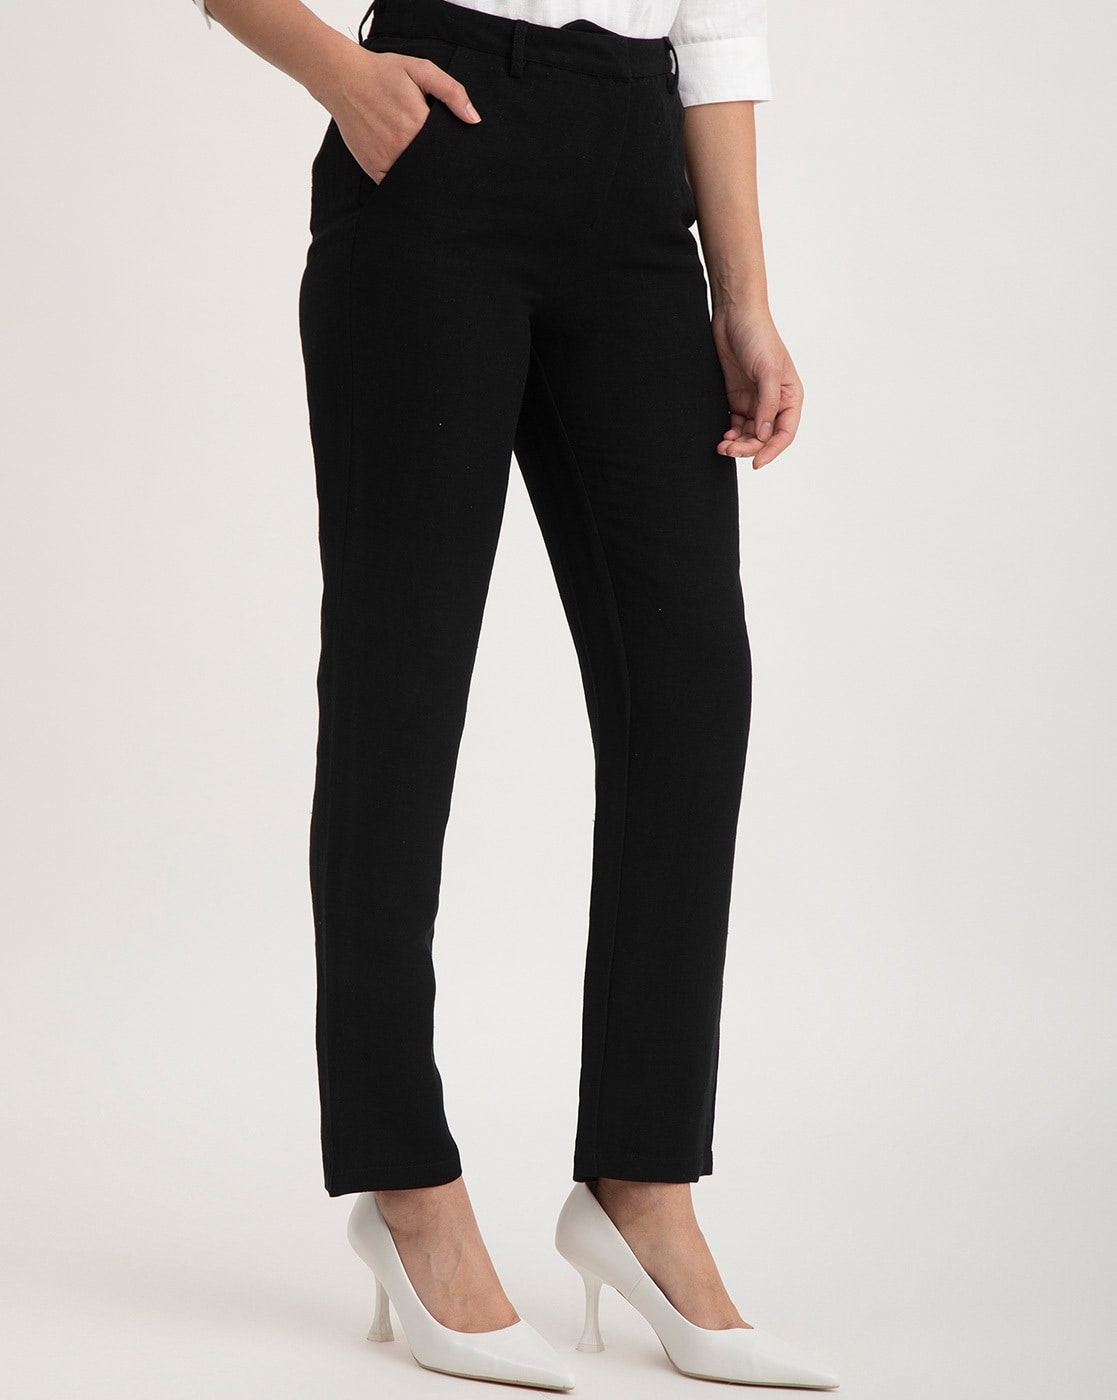 Cato Fashions | Cato Slim Ankle Pants